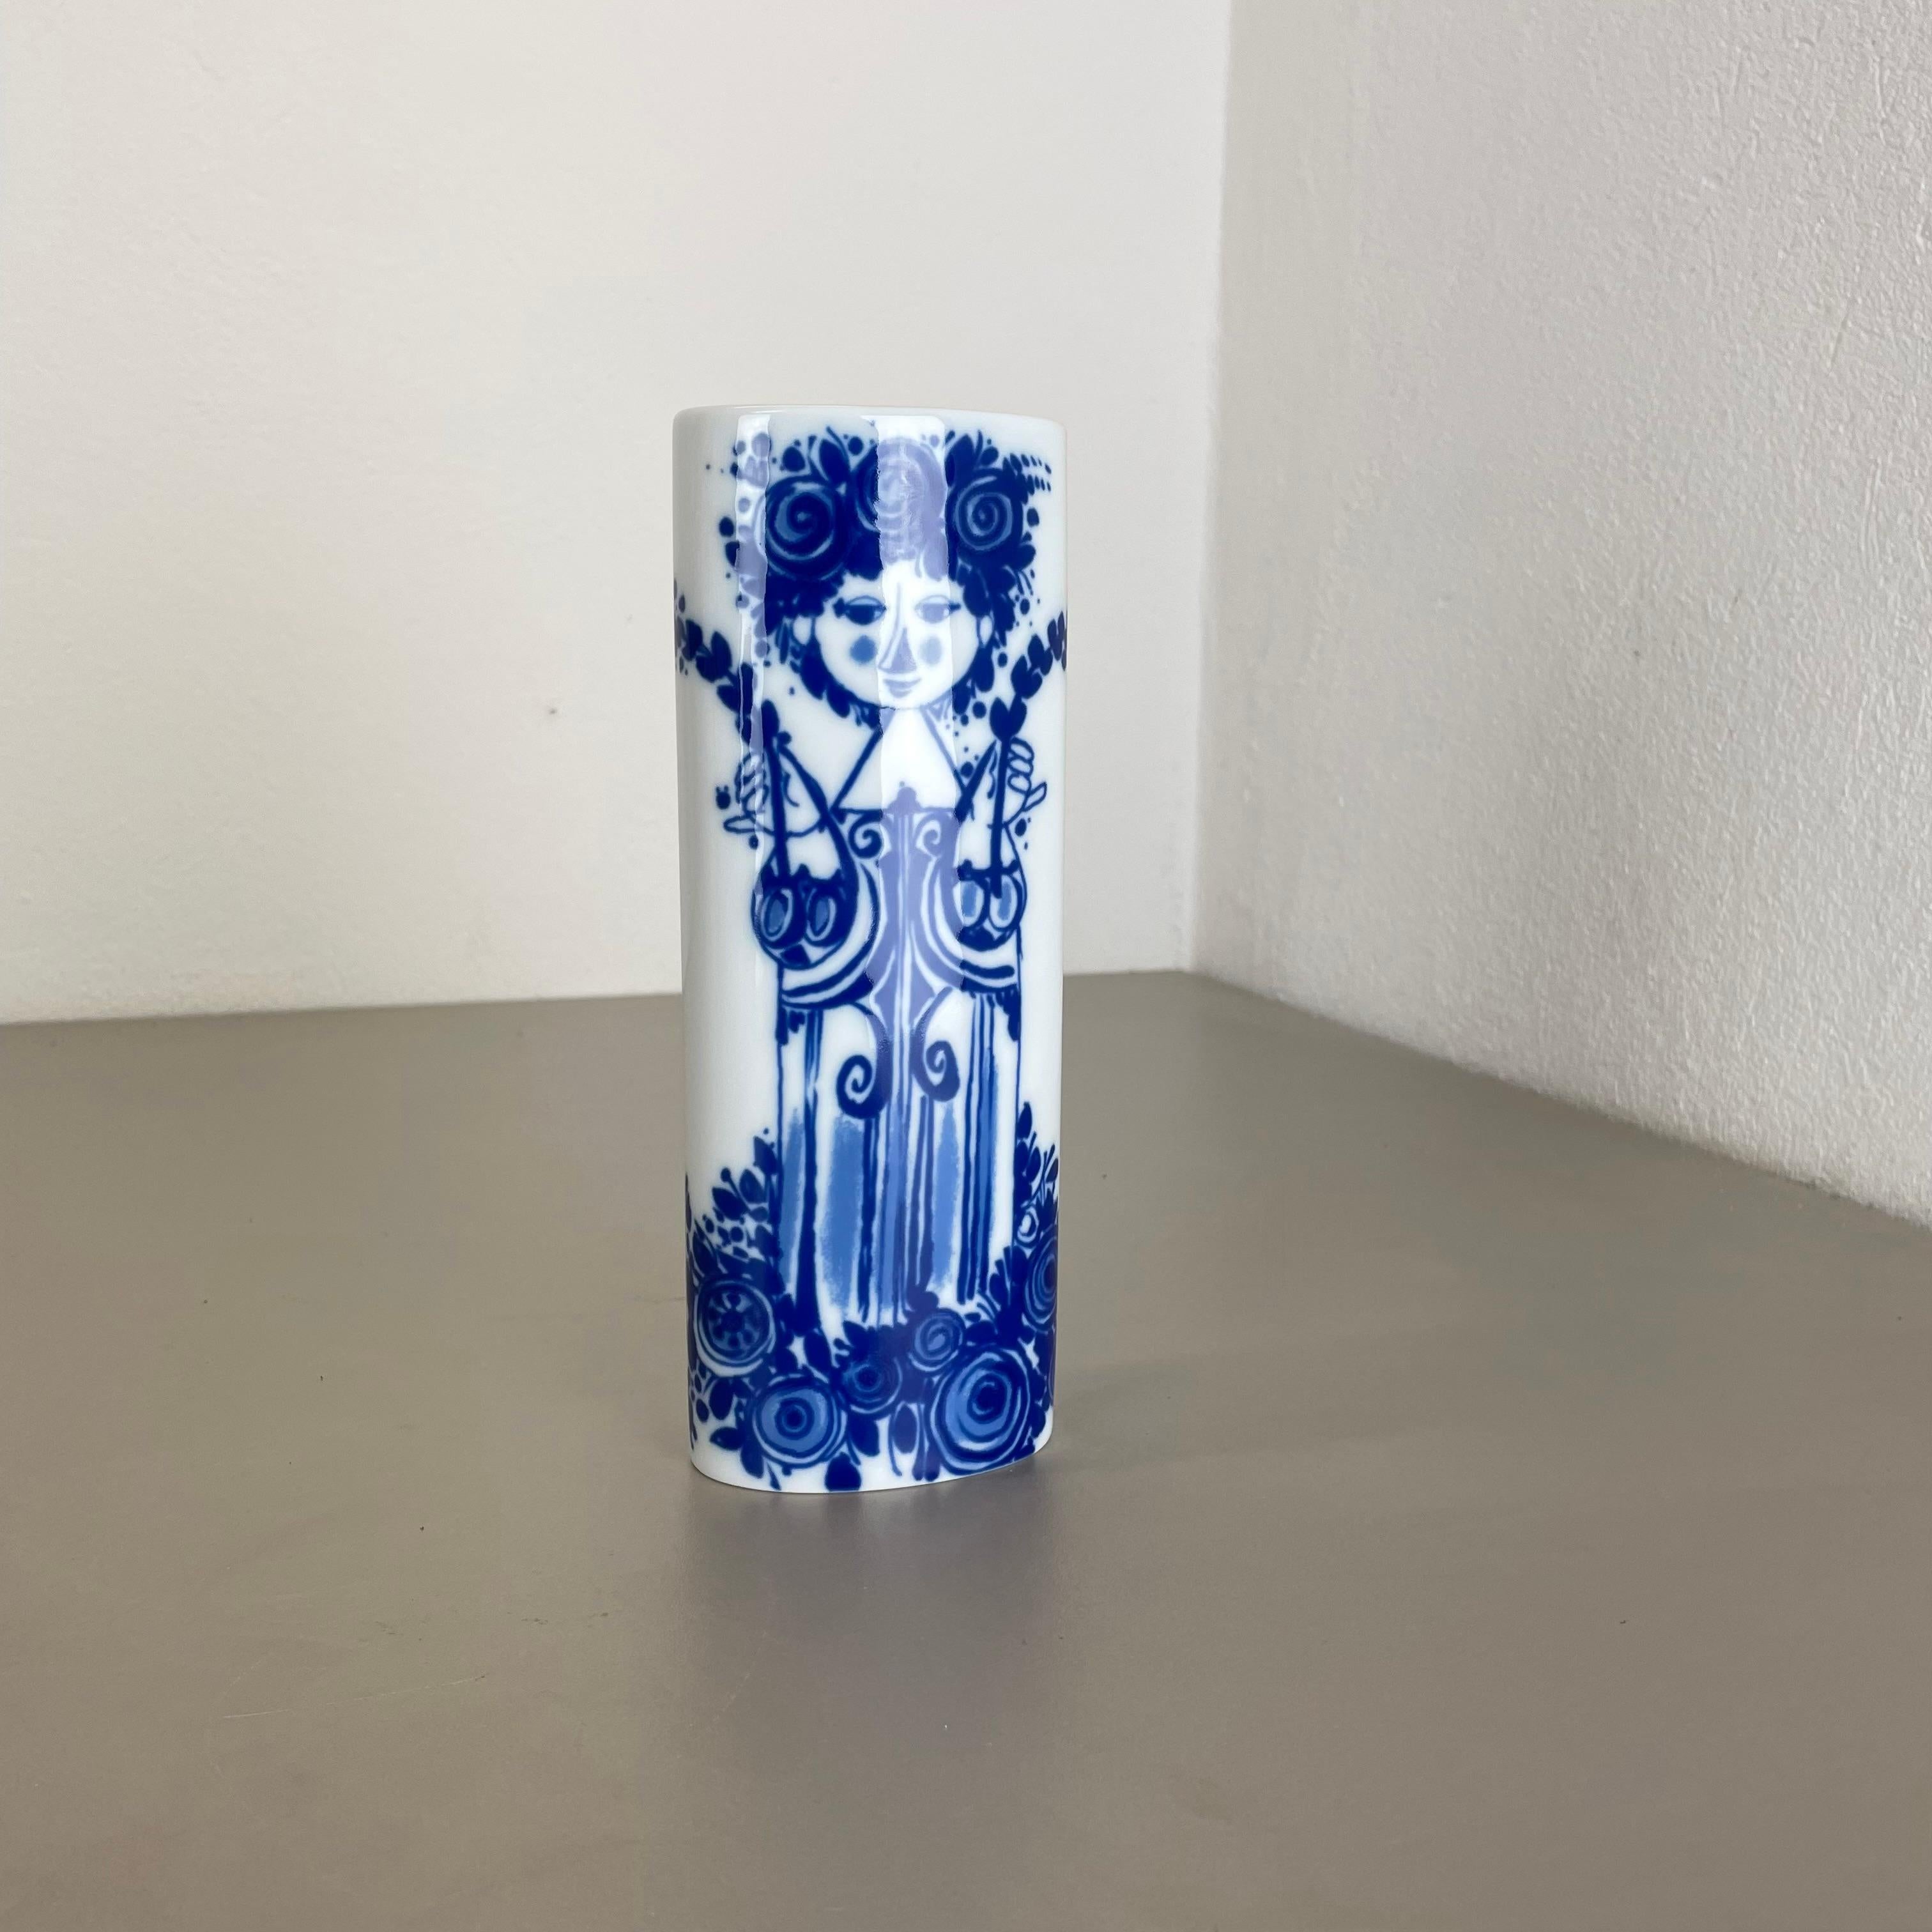 Article:

Op Art porcelain vase


Producer:

Rosenthal, Germany


Designer:

Björn Wiinblad



Decade:

1970s





This original vintage Op Art vase was produced in the 1970s in Germany by Rosenthal. It is made of porcelain and has a fantastic blue